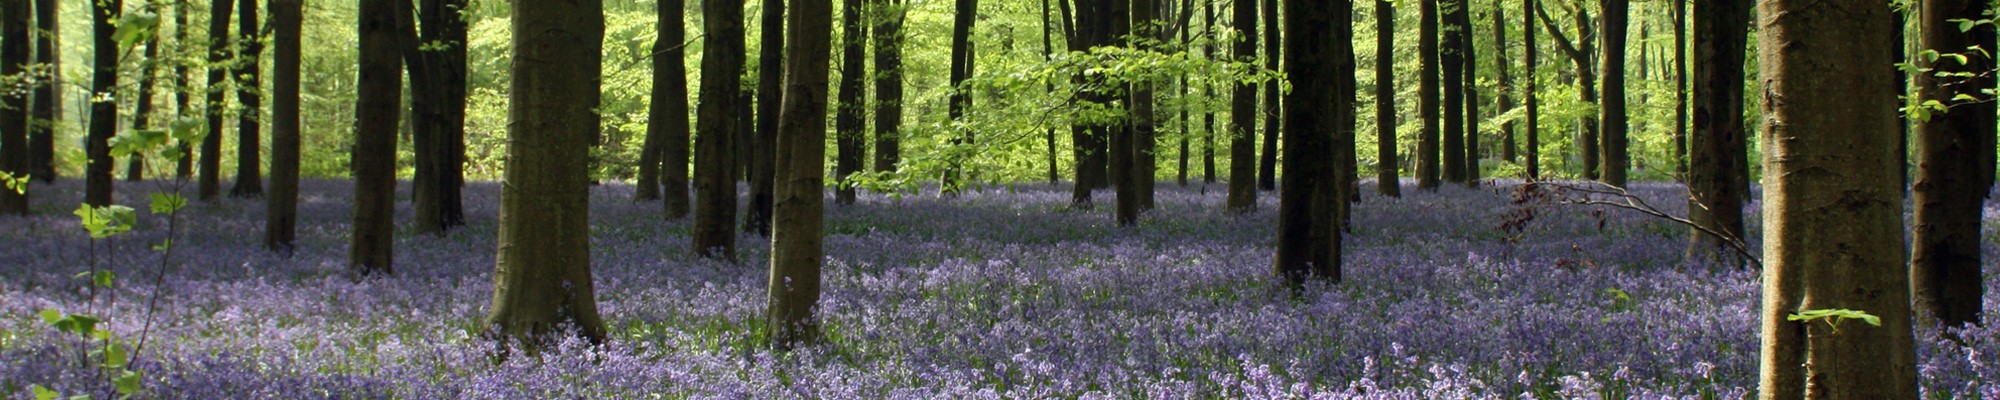 Sylvan Clients - Bluebell Woodland Image